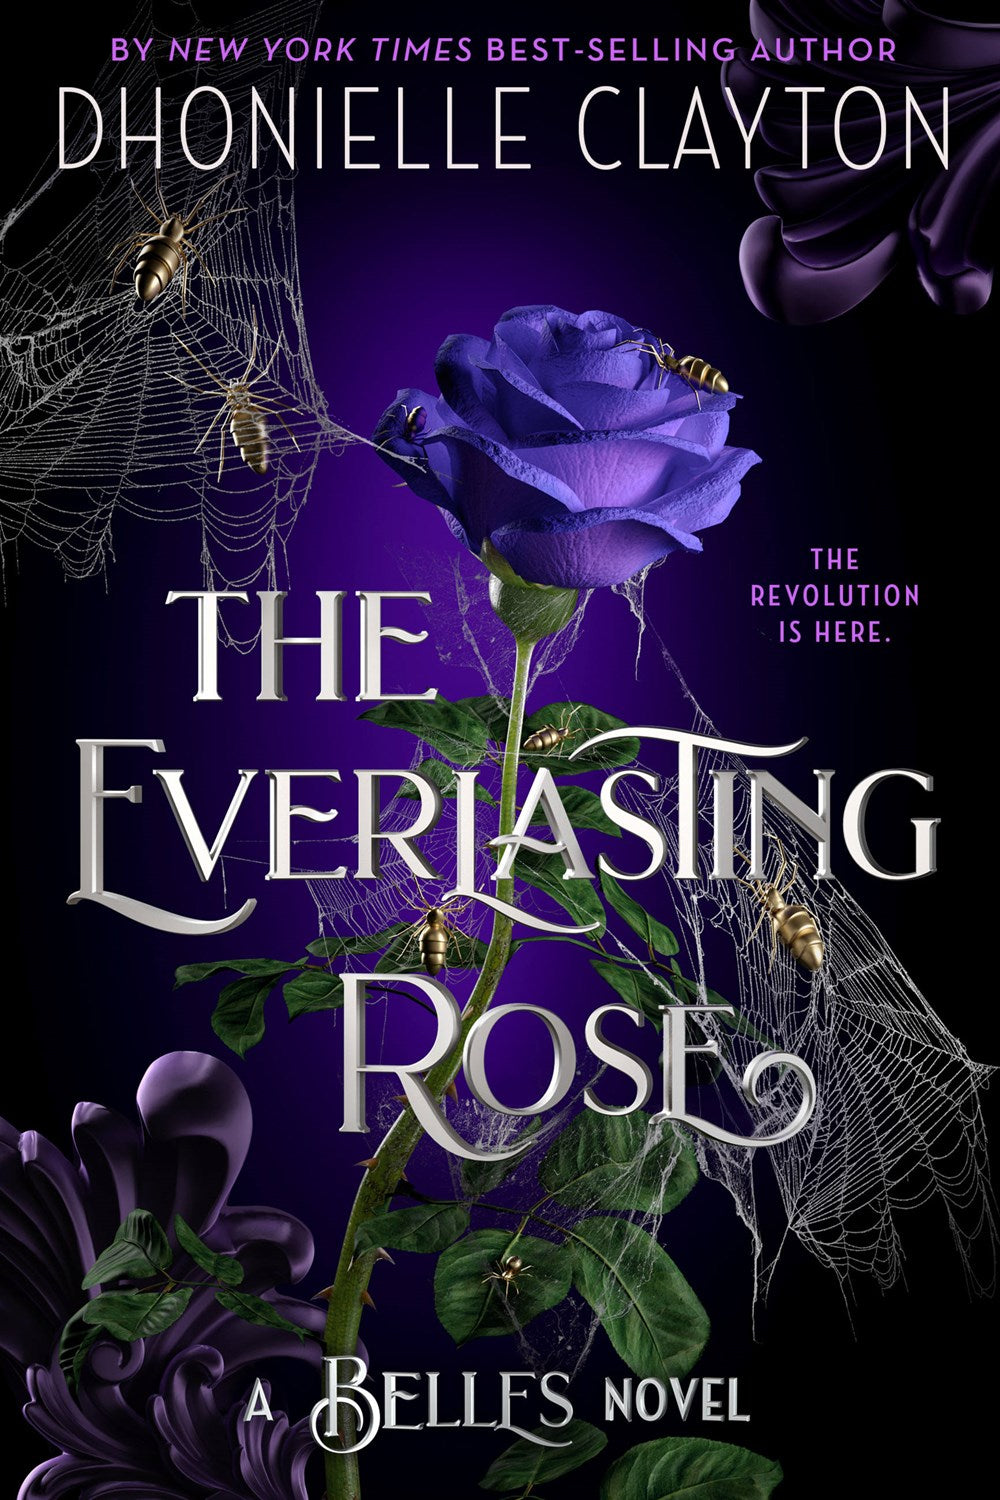 The Everlasting Rose (The Belles series, Book 2) by Dhonielle Clayton